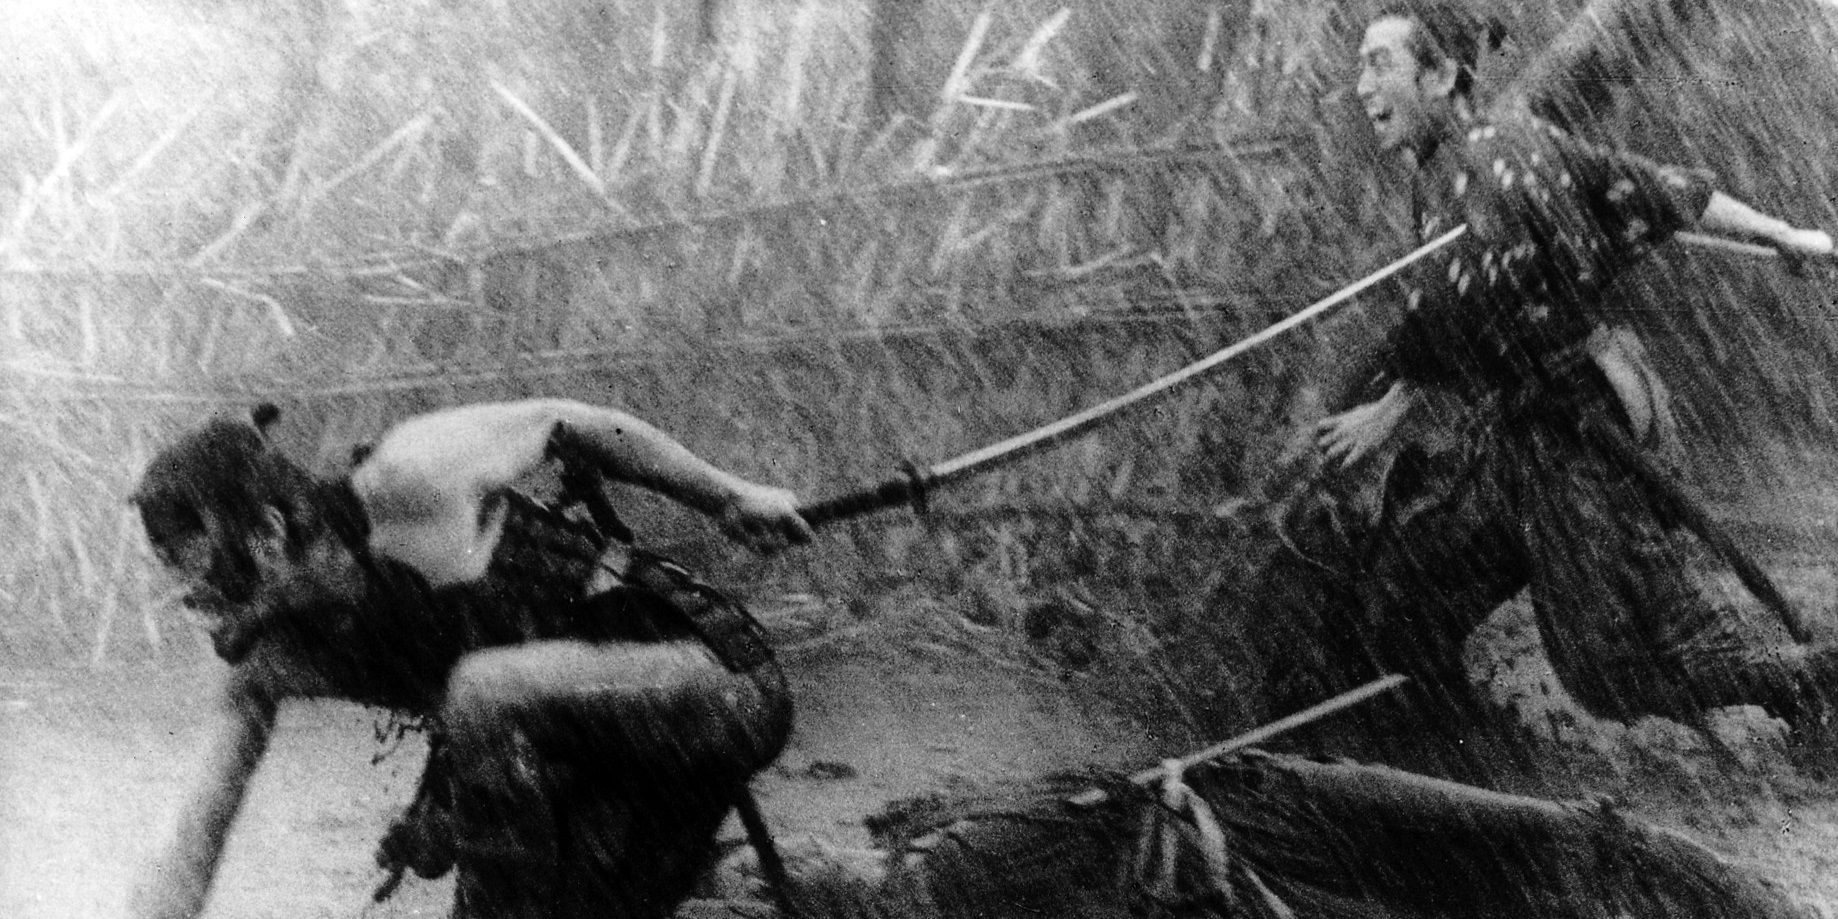 An image of two characters fighting in the rain in the Seven Samurai